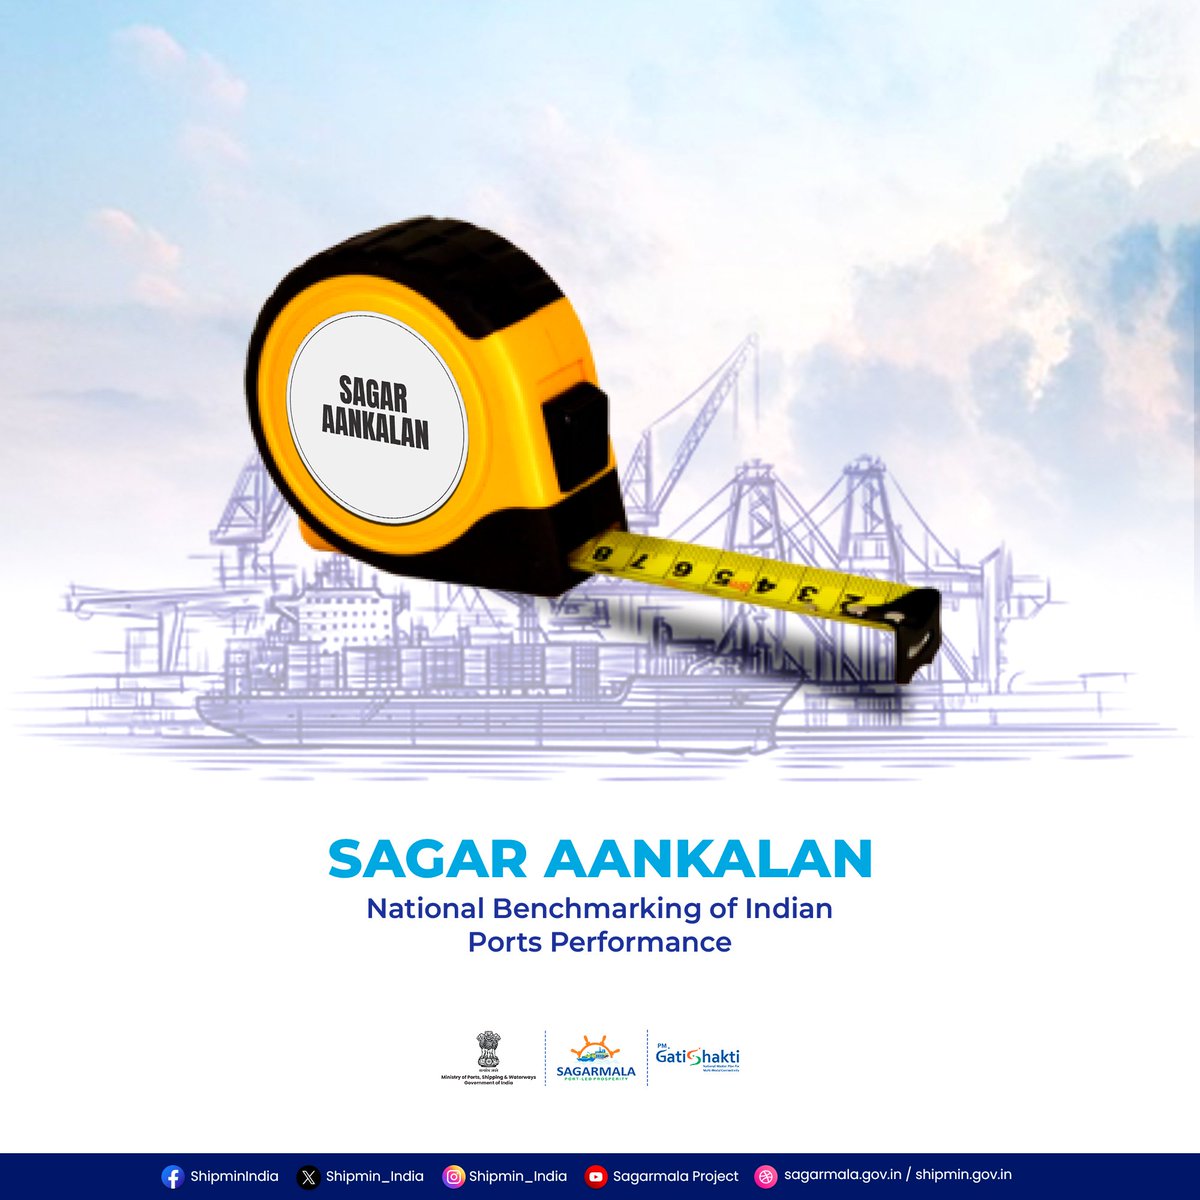 SAGAR AANKALAN Guidelines for National Benchmarking of Indian Ports Performance would be applicable to all Indian seaports with an aim to achieve; Mapping & benchmarking of their logistics performance, Harmonisation of standards, definitions & performance with global benchmarks.